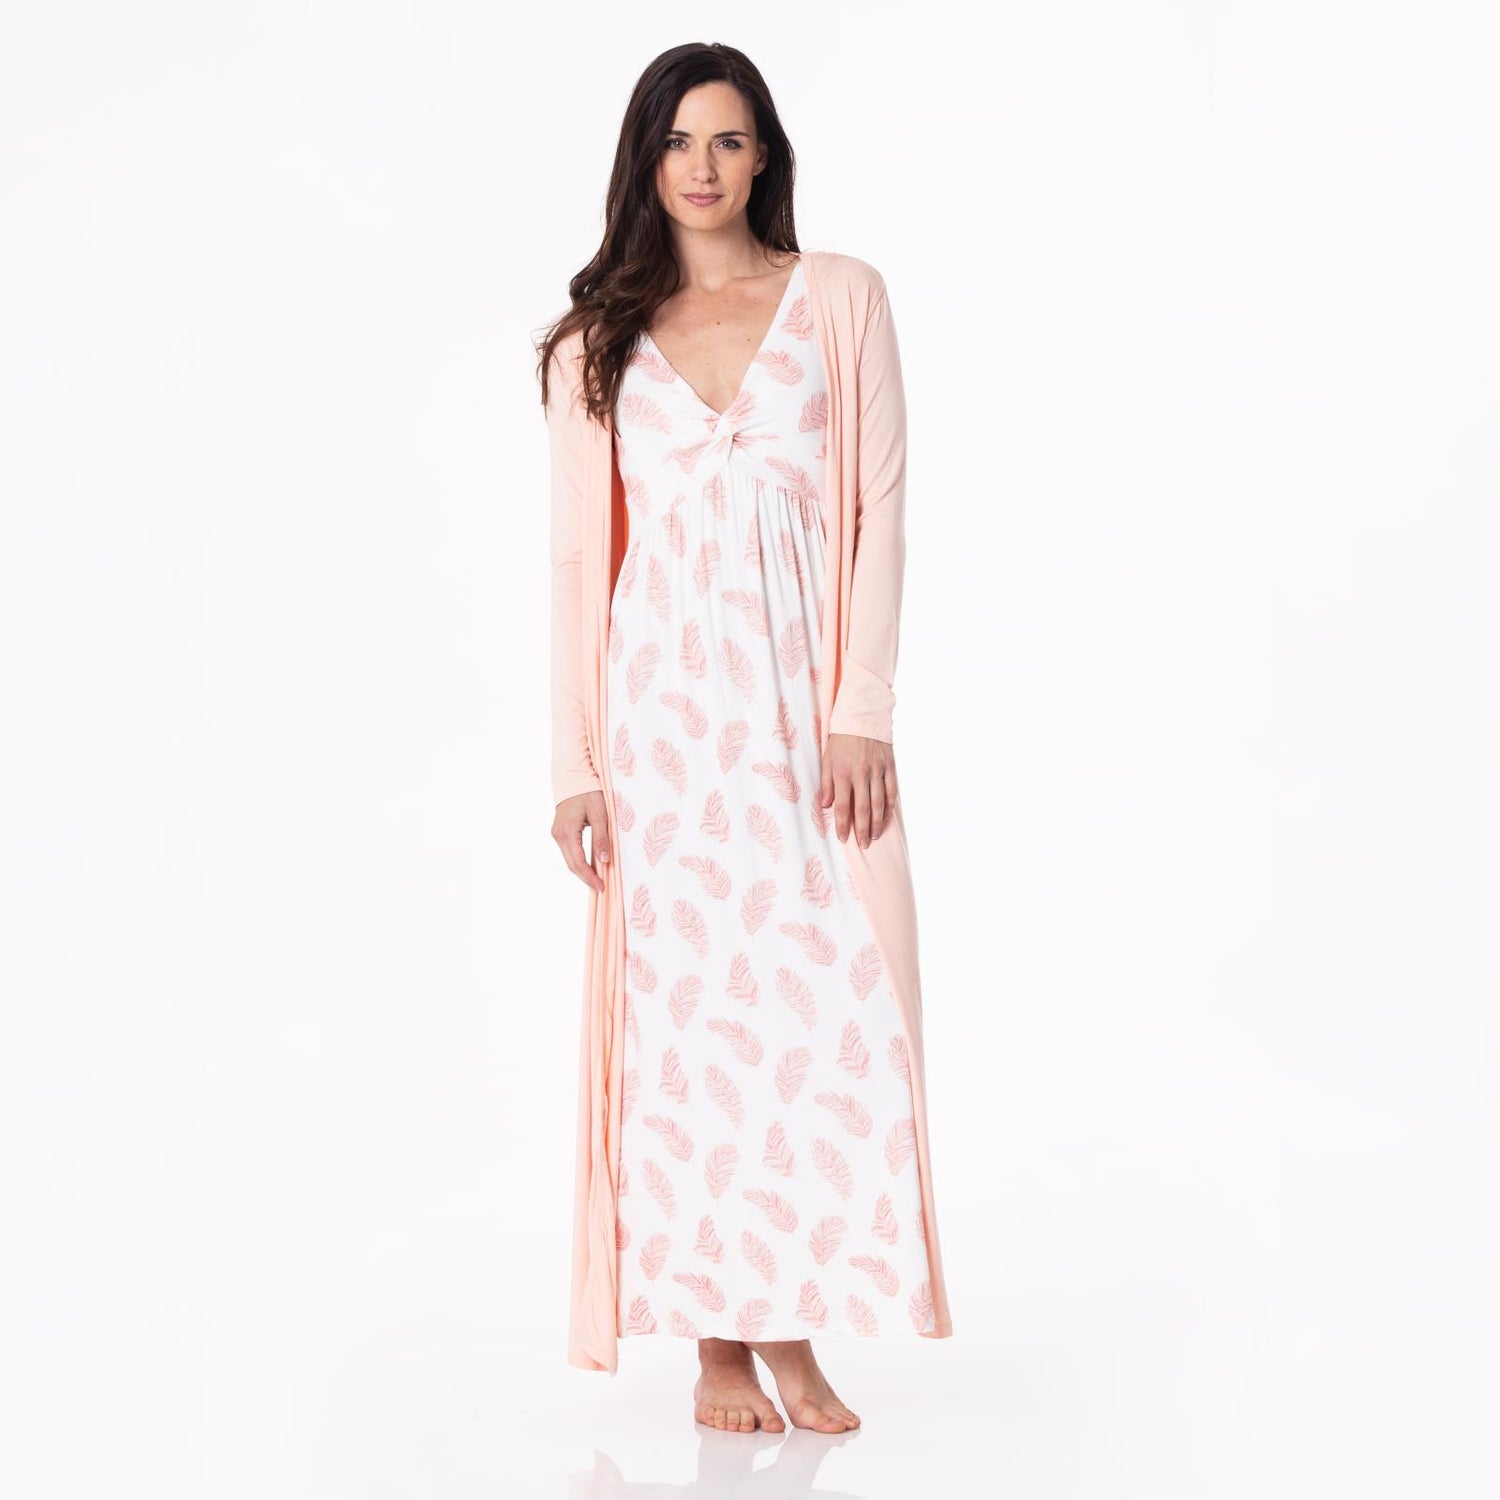 Women's Solid Basic Robe in Peach Blossom